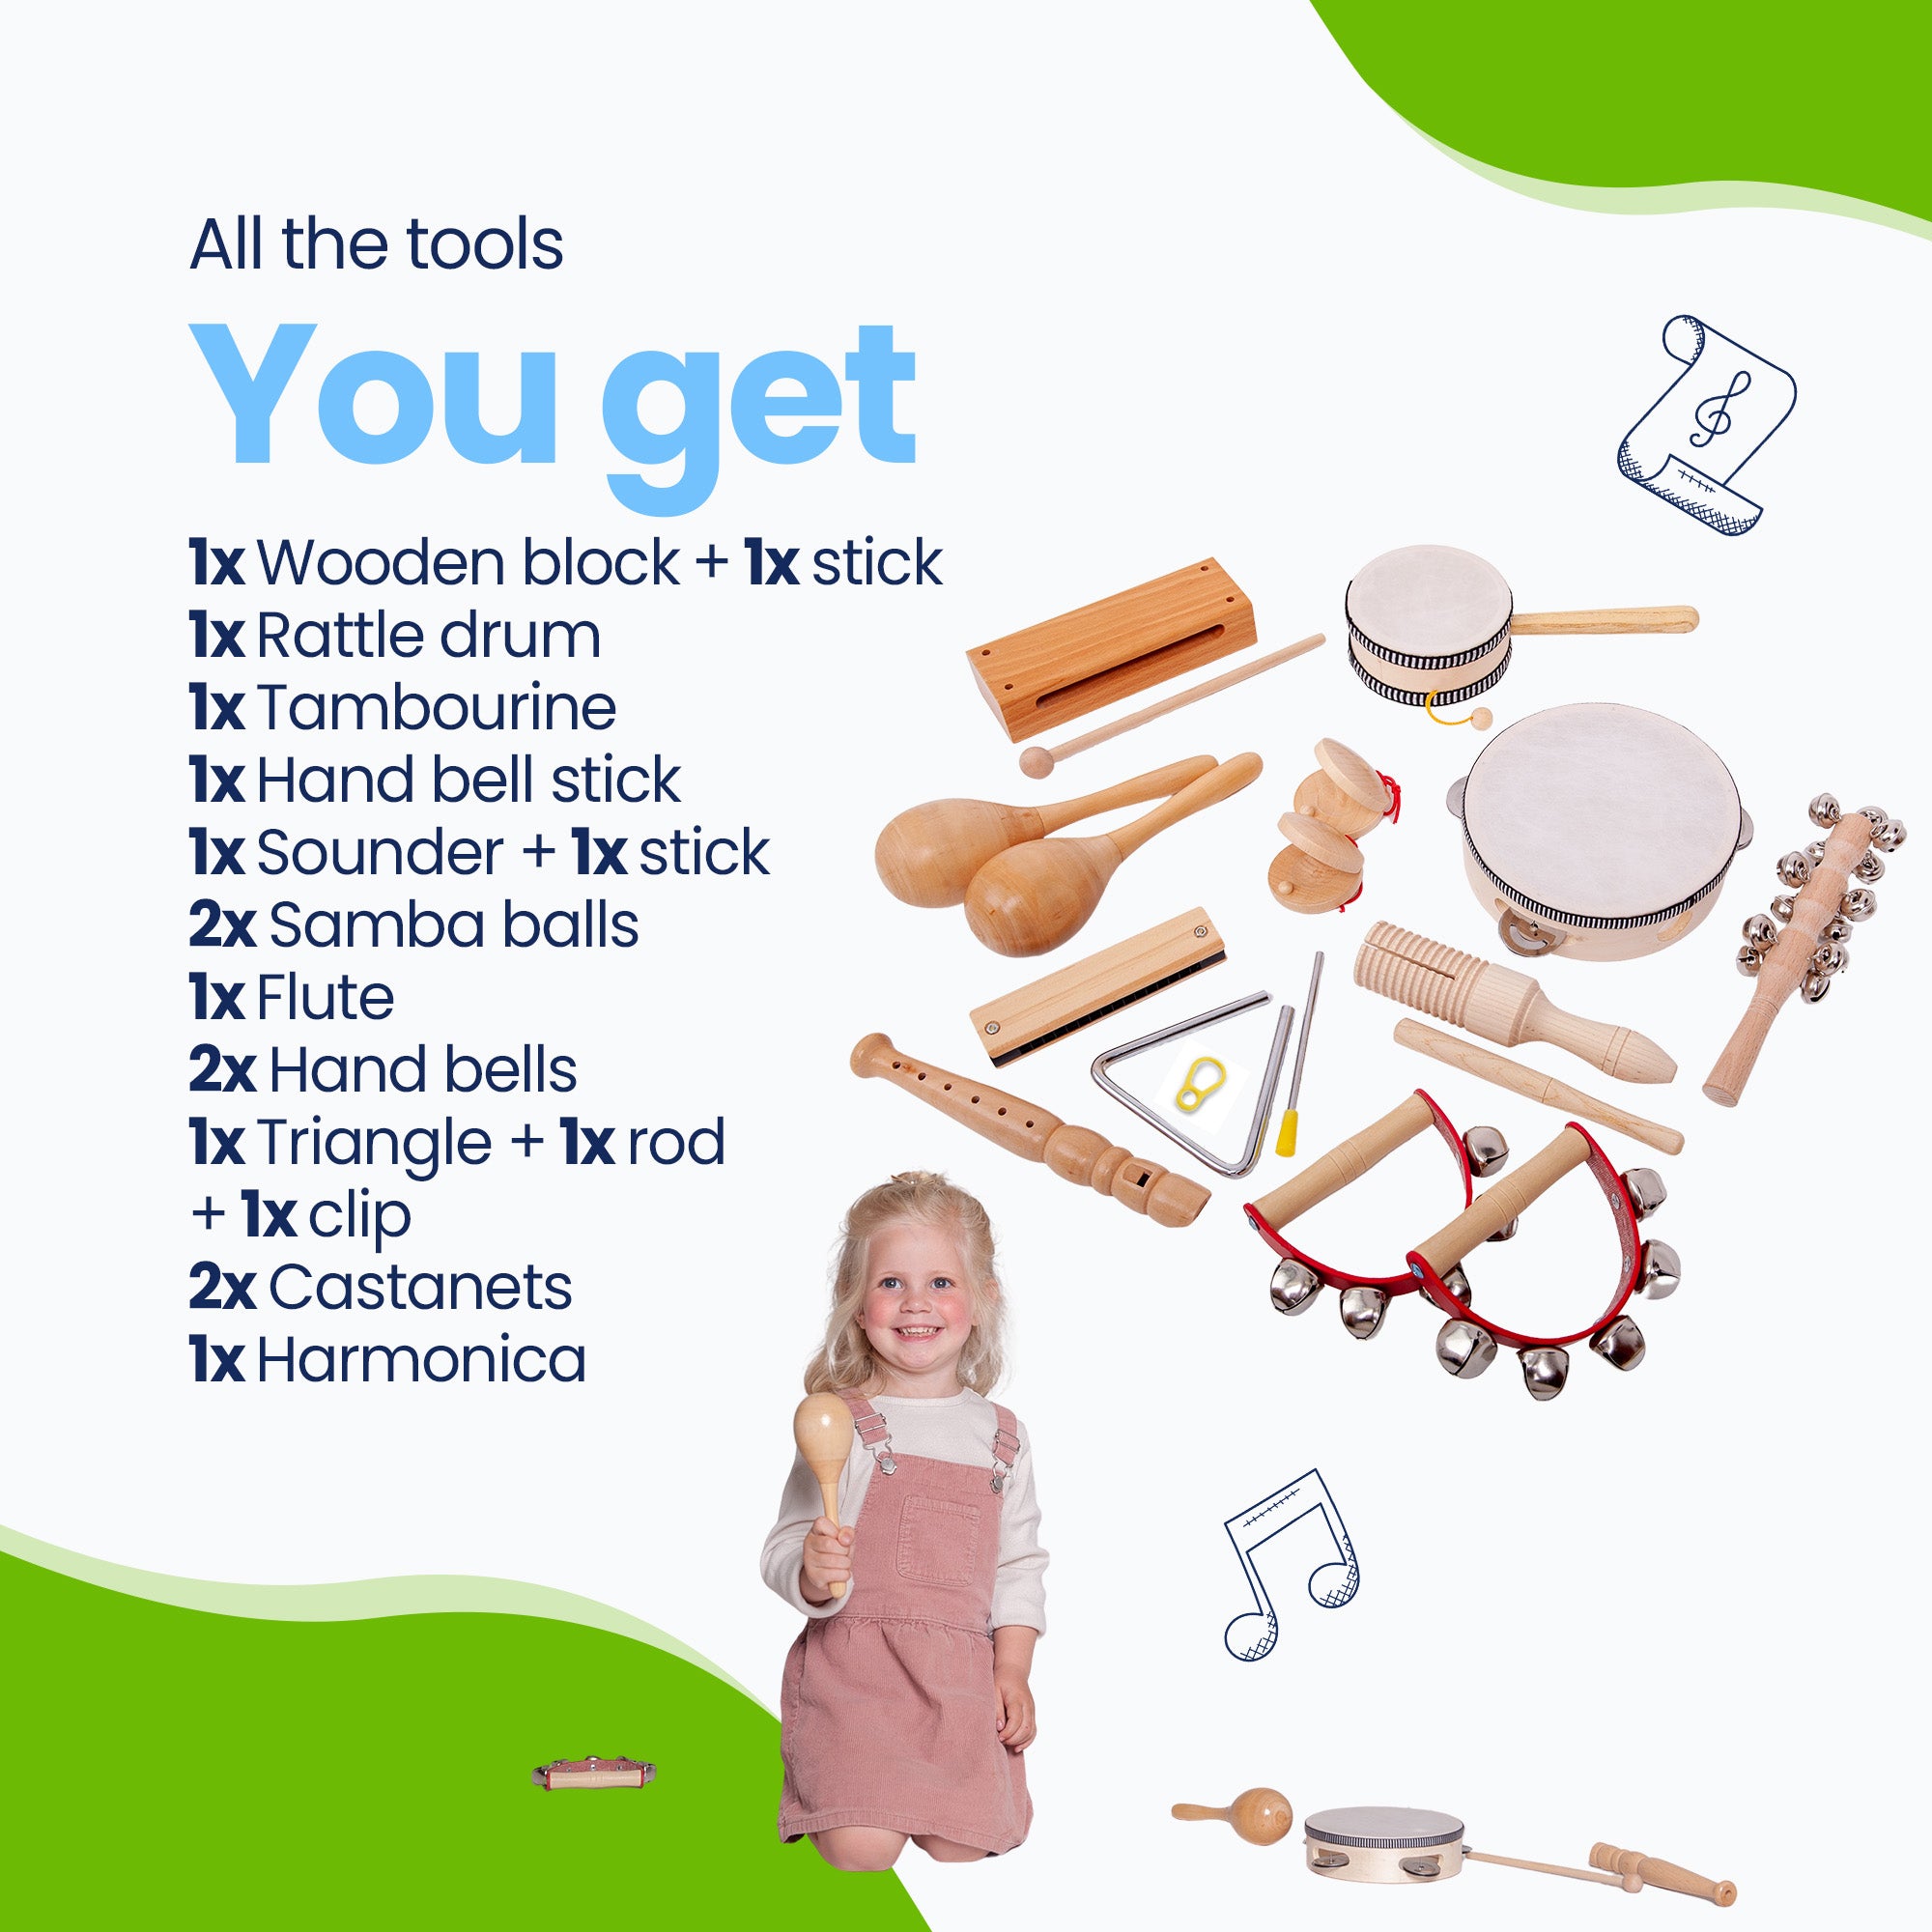 This set contains enough toy musical instruments to start a band! Which instrument do you choose? The handbells or rather the casta nets. Something for everyone!